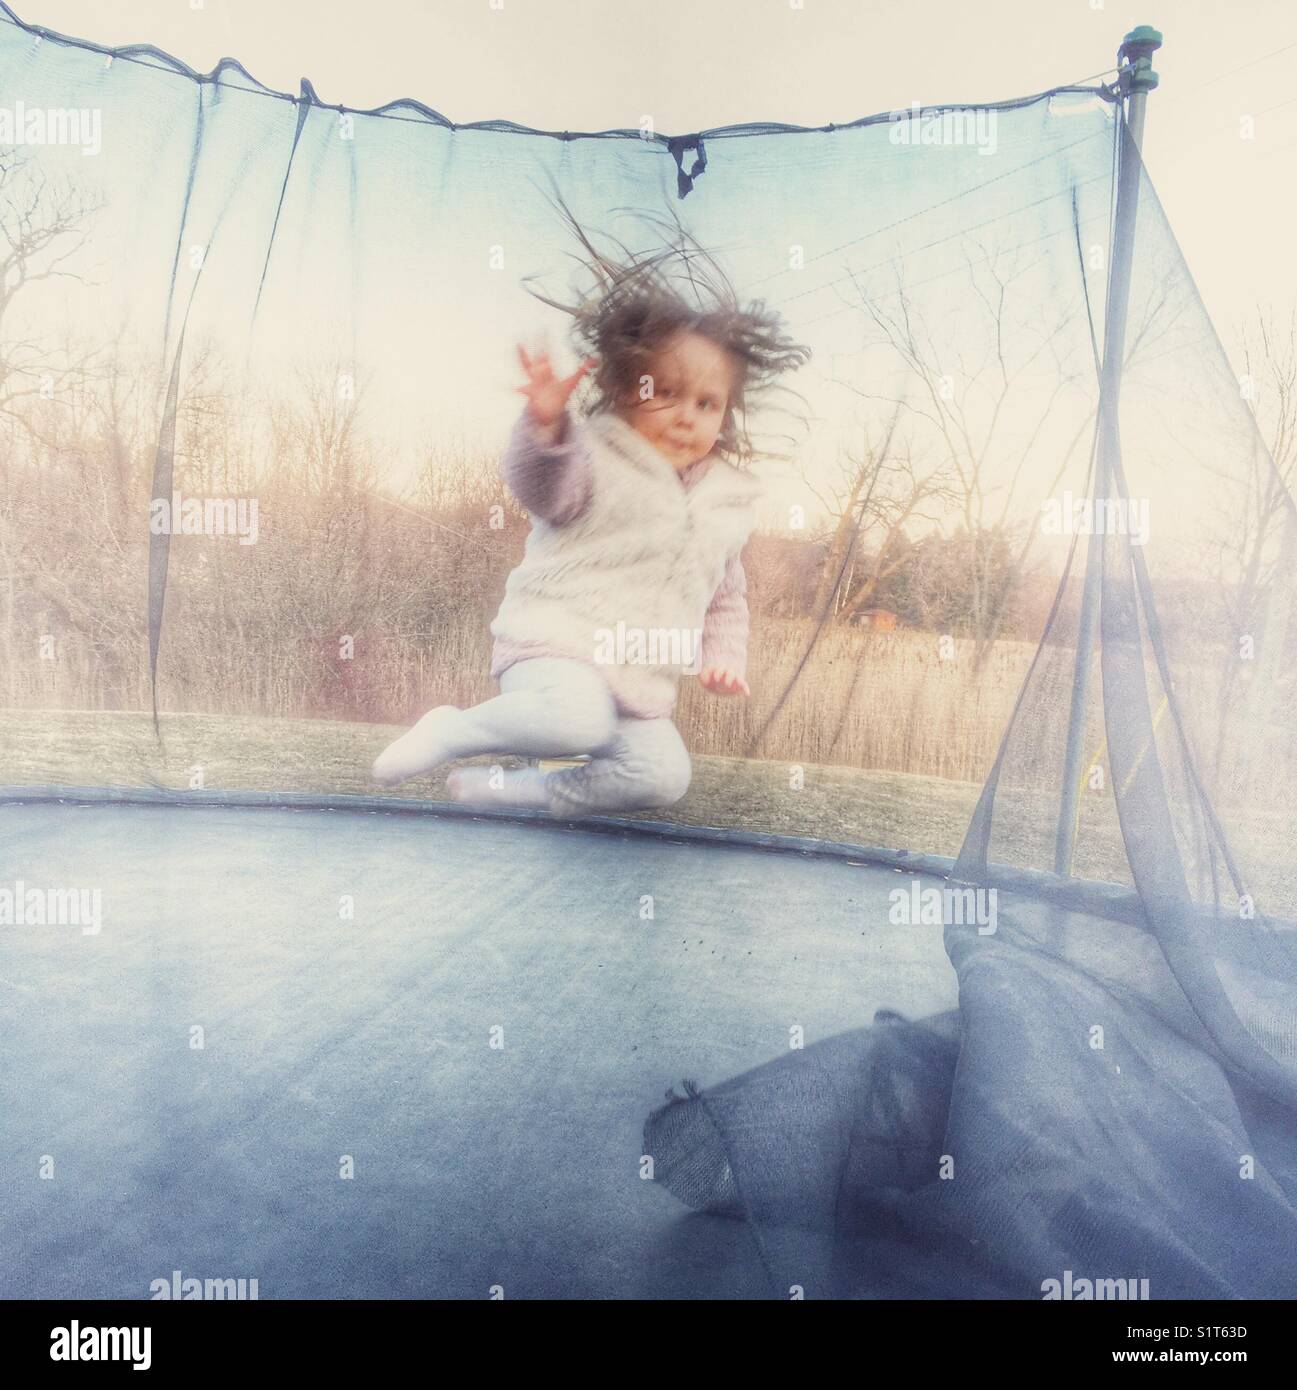 Toddler girl captured mid-air while jumping on an old run down trampoline outside Stock Photo